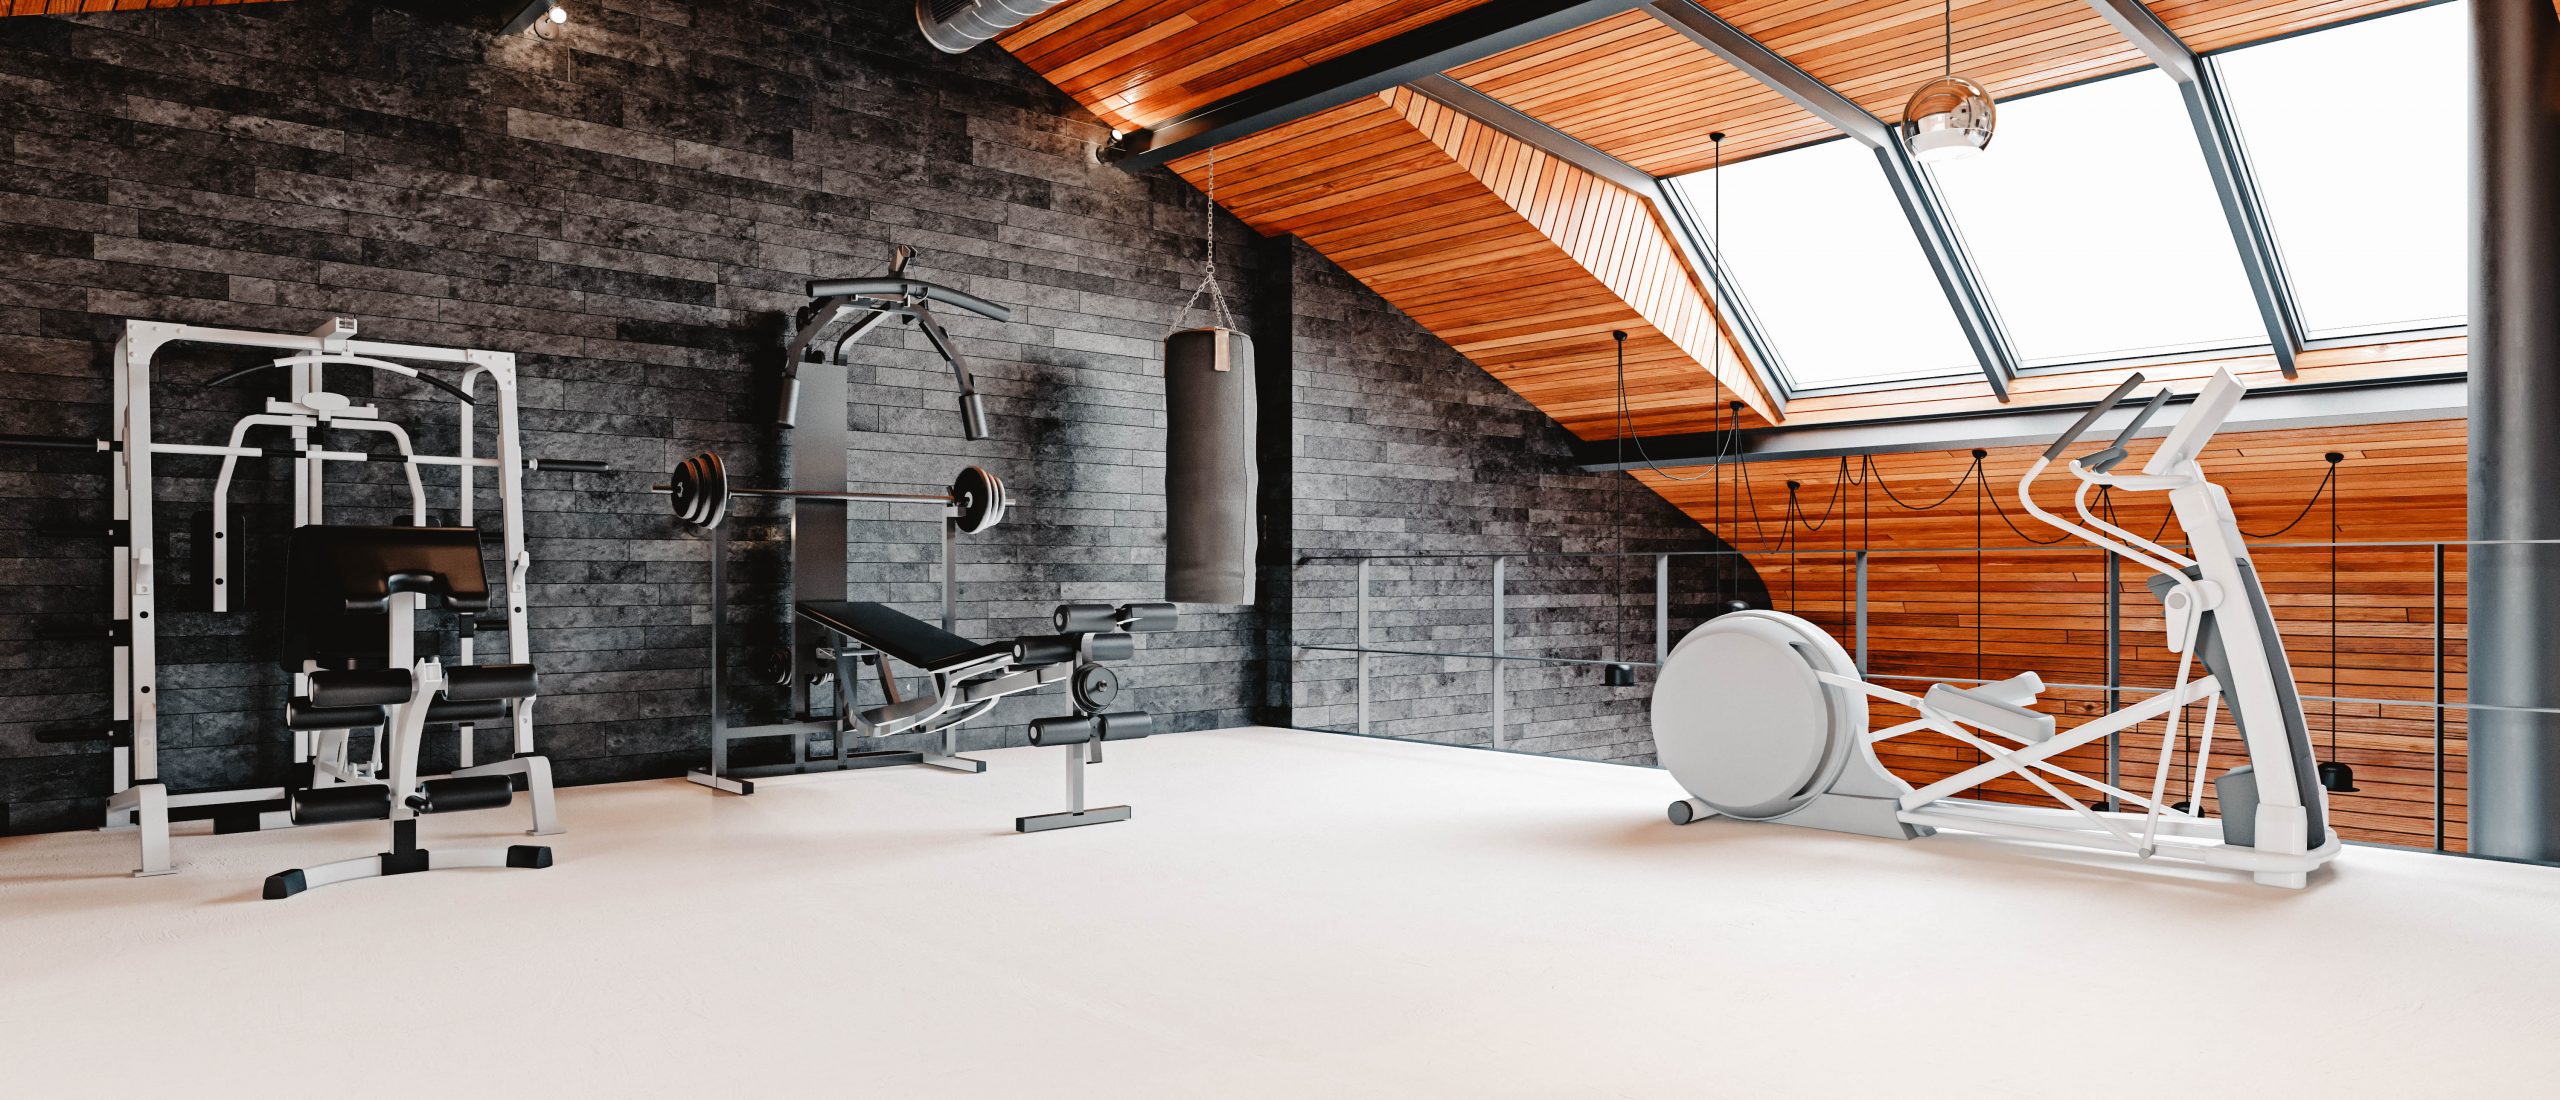 Gym in a large attic room